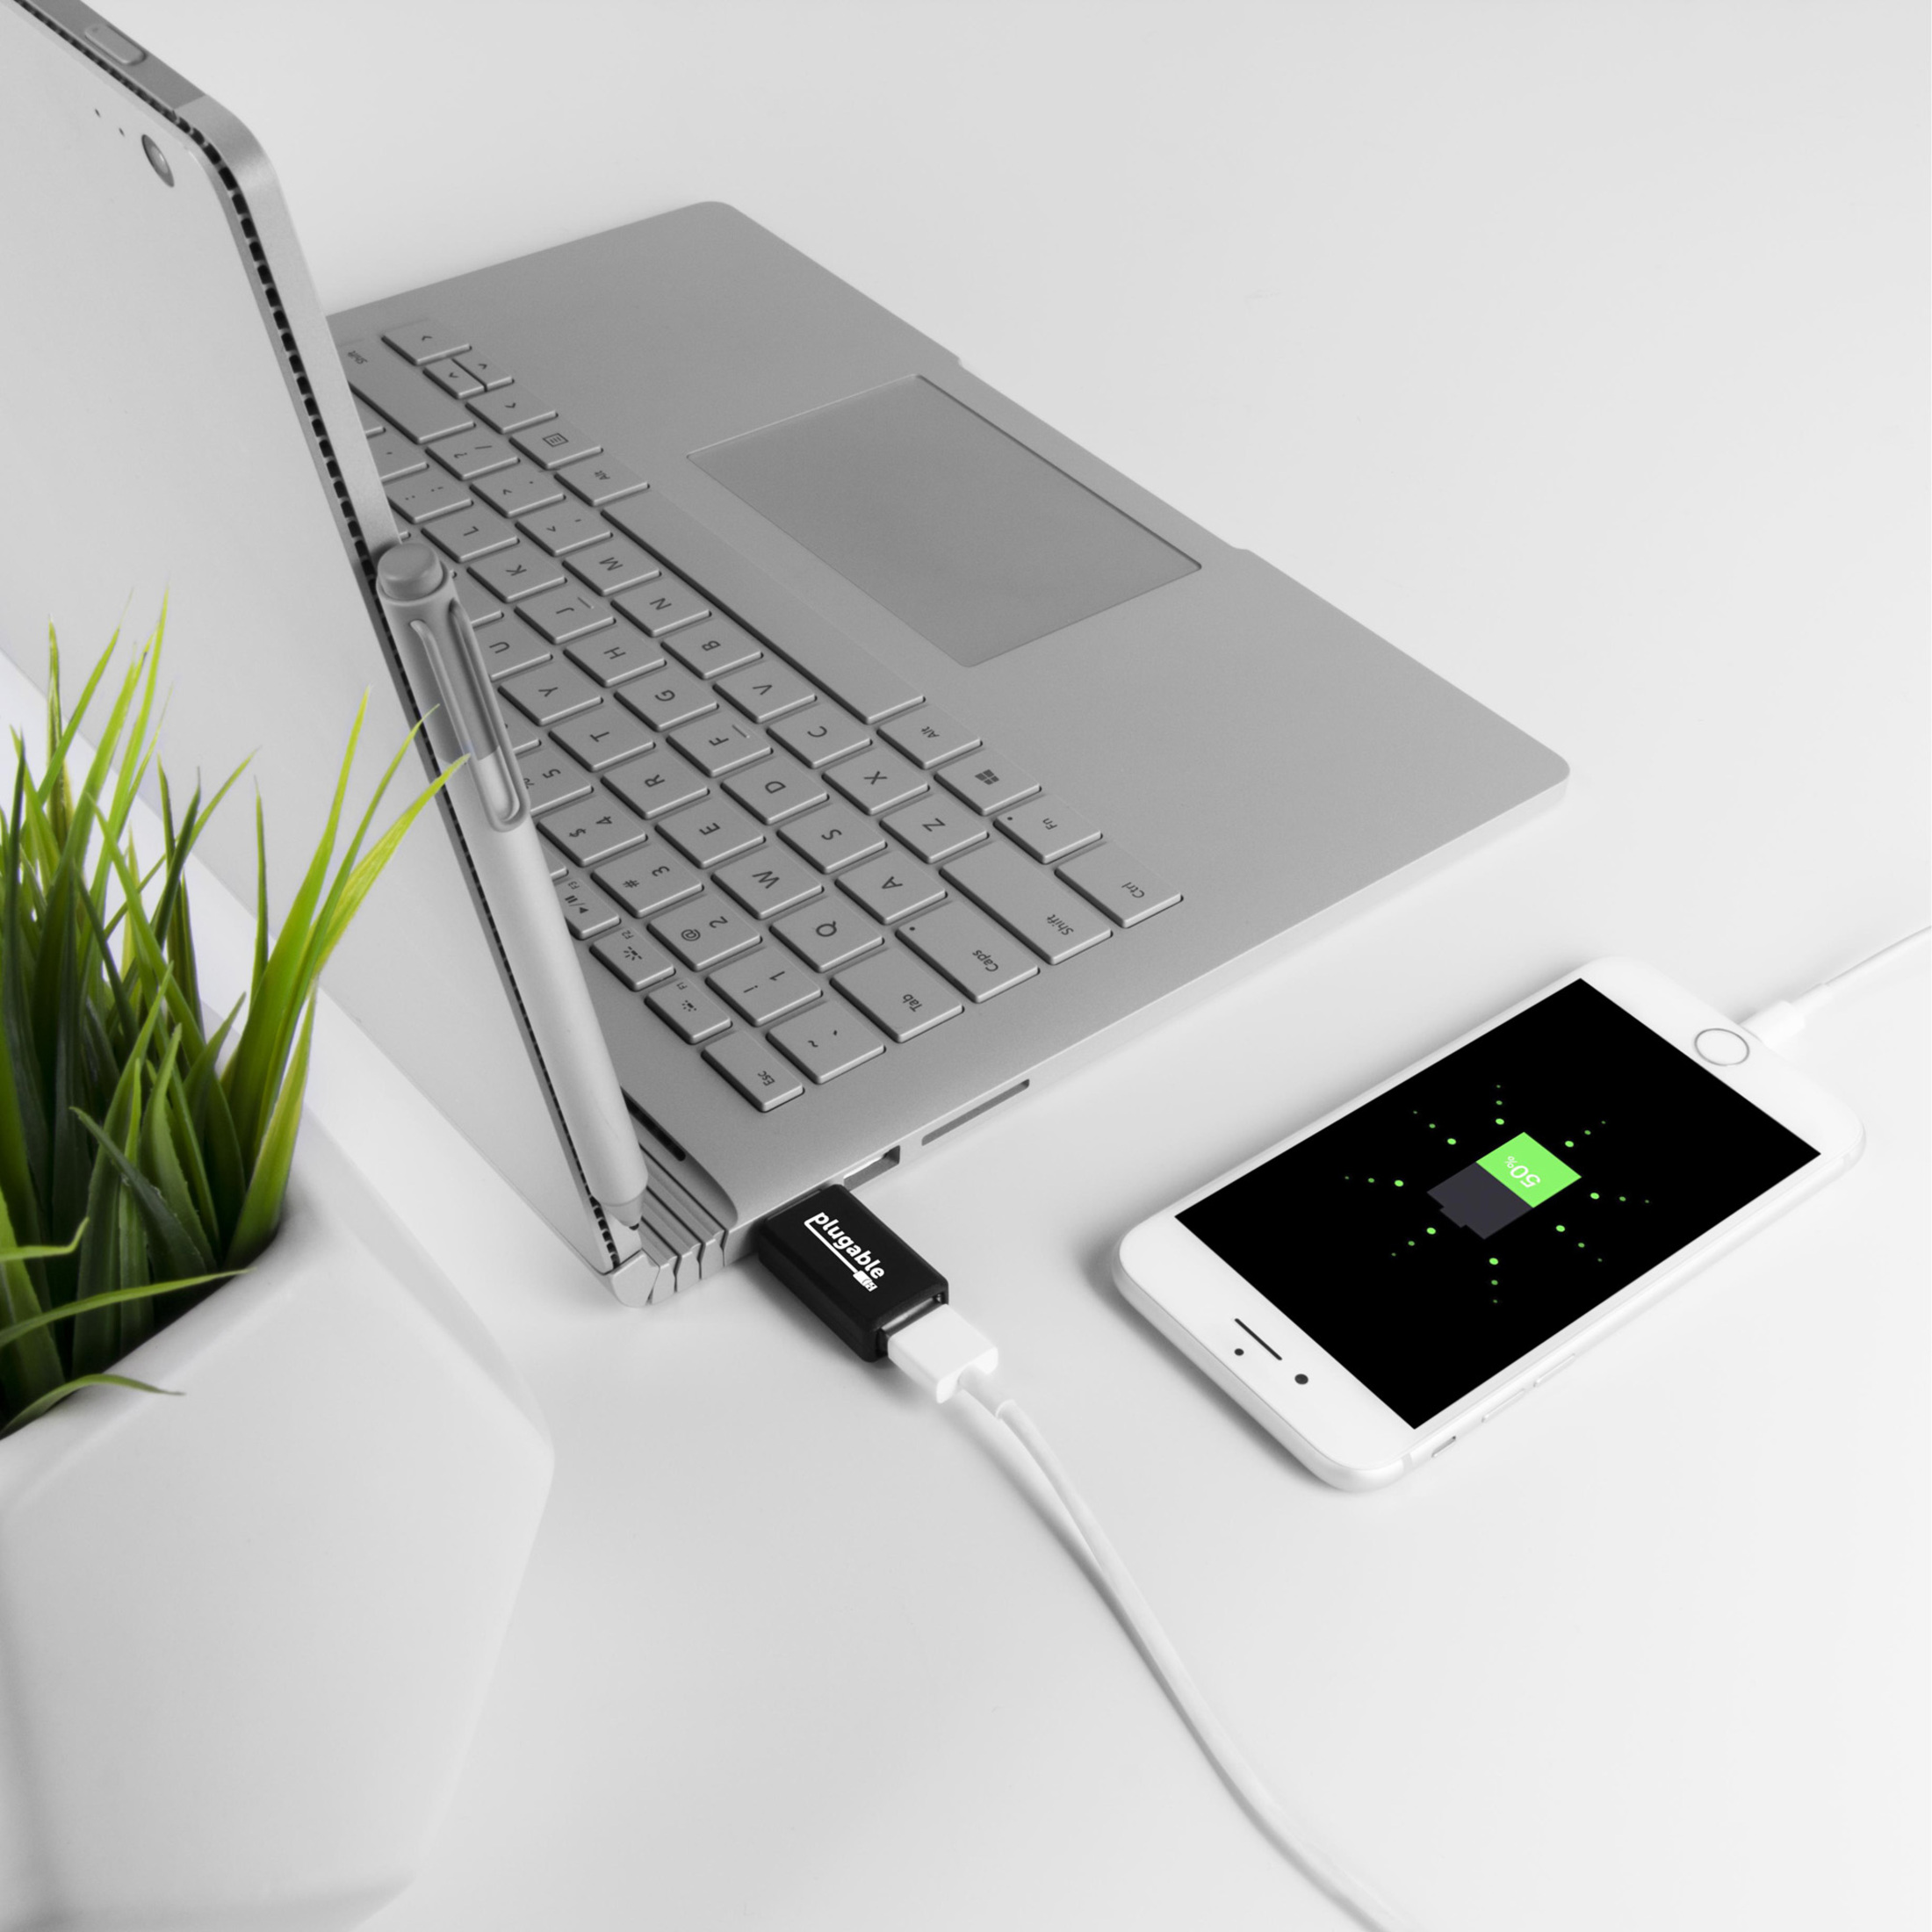 Plugable USB Universal Fast 1A Charge-Only Adapter for Android, Apple iOS, and Windows Mobile Devices - image 2 of 5